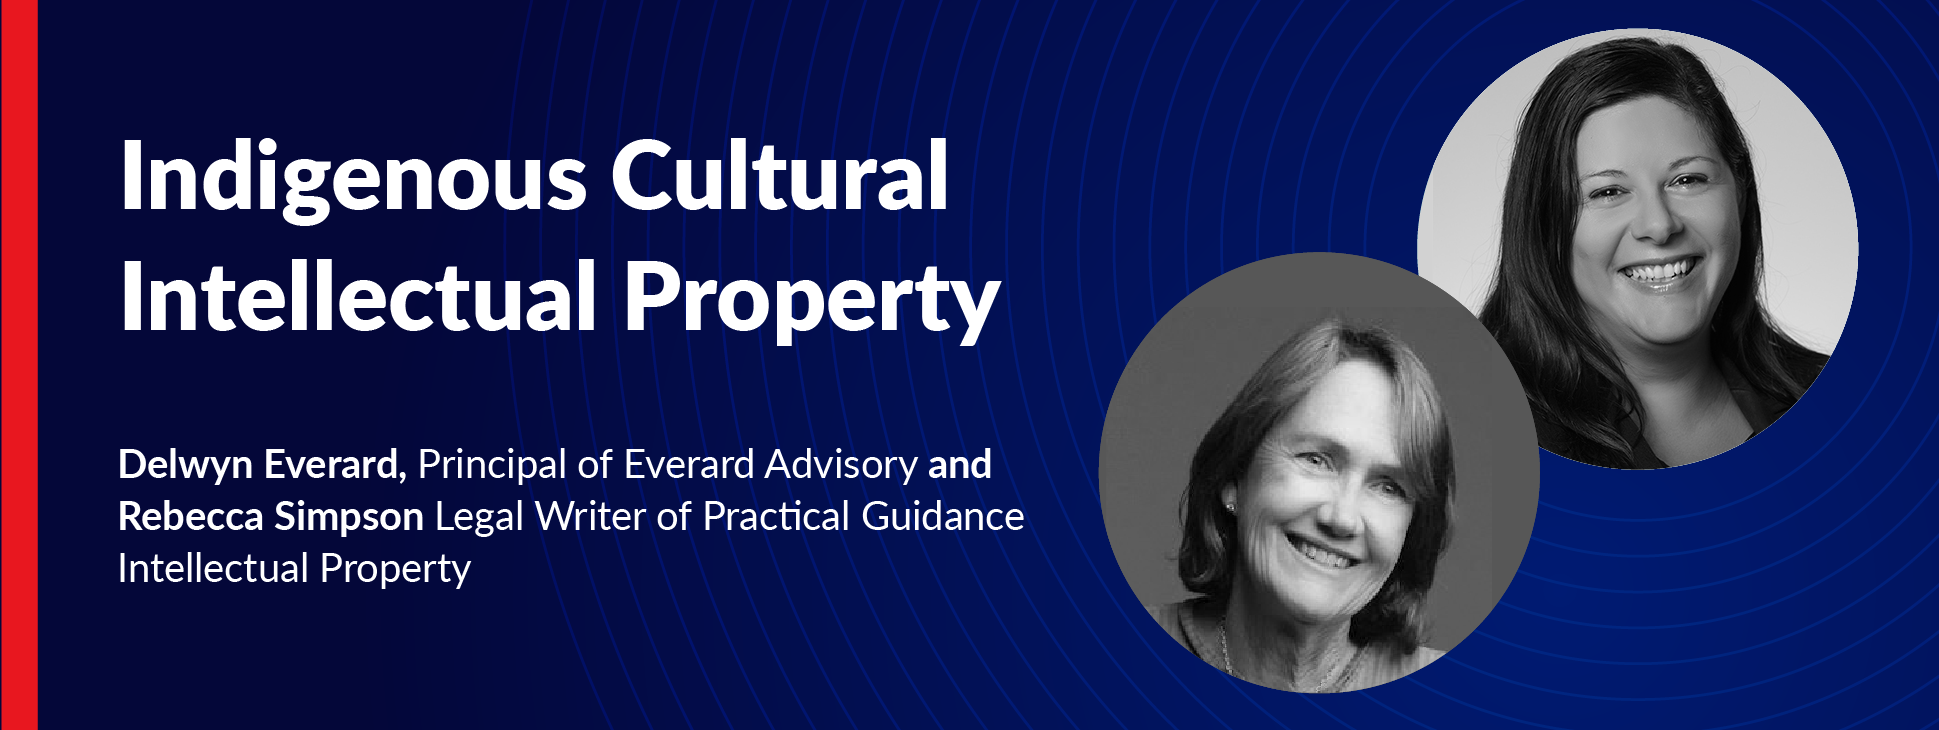 Indigenous Cultural IP – new topic on Practical Guidance Intellectual Property